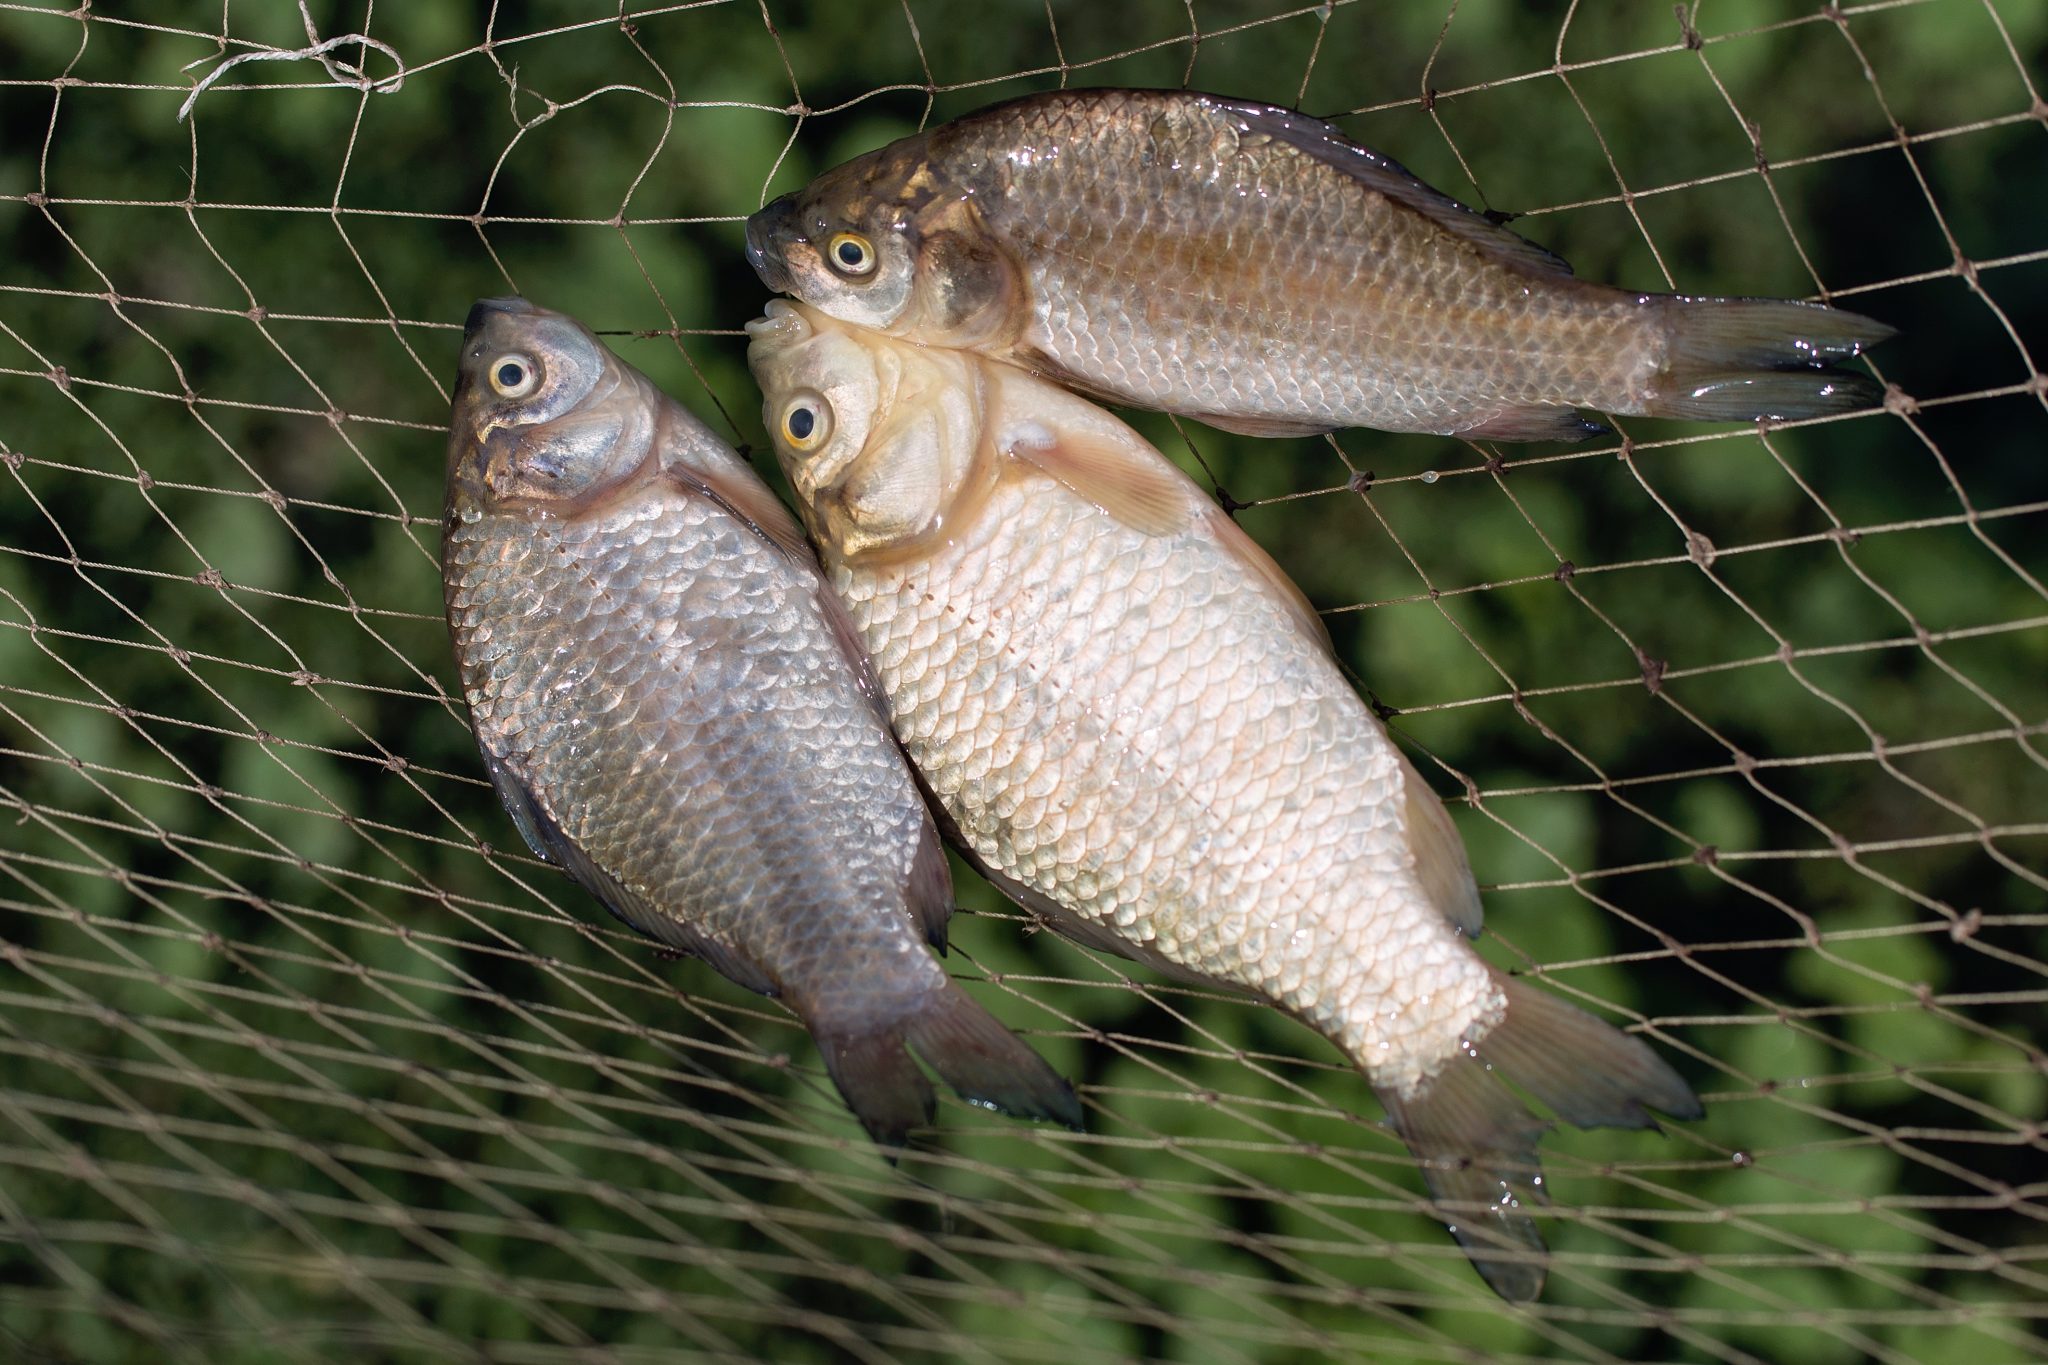 Fish in the net